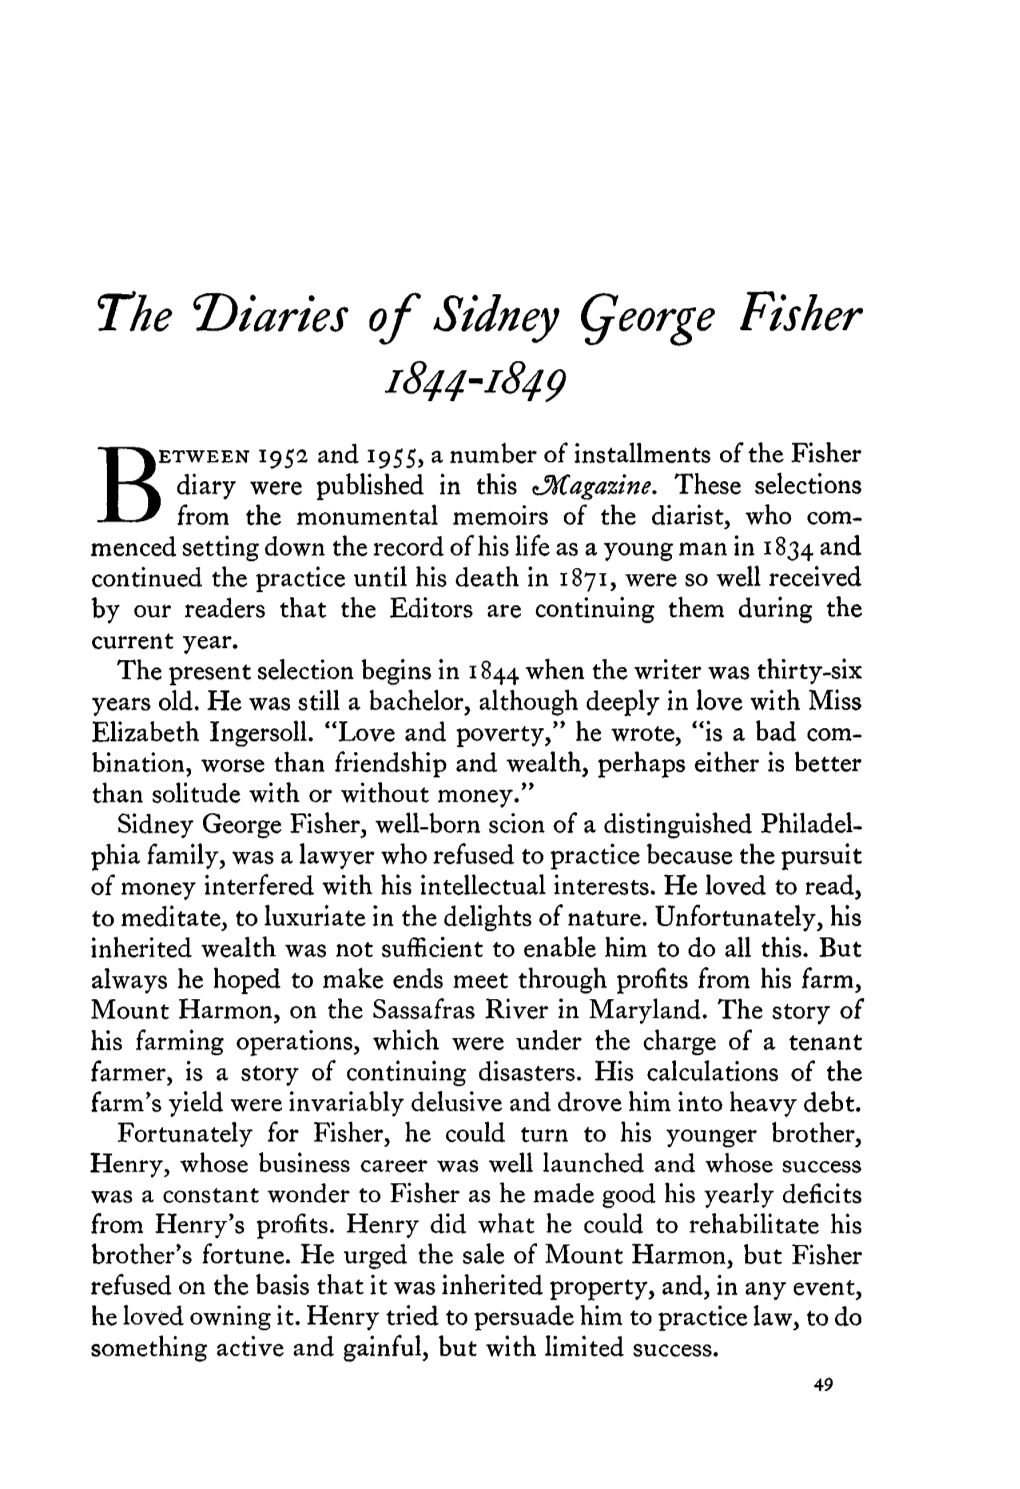 The Diaries of Sidney Qeorge Fisher 1844-1849